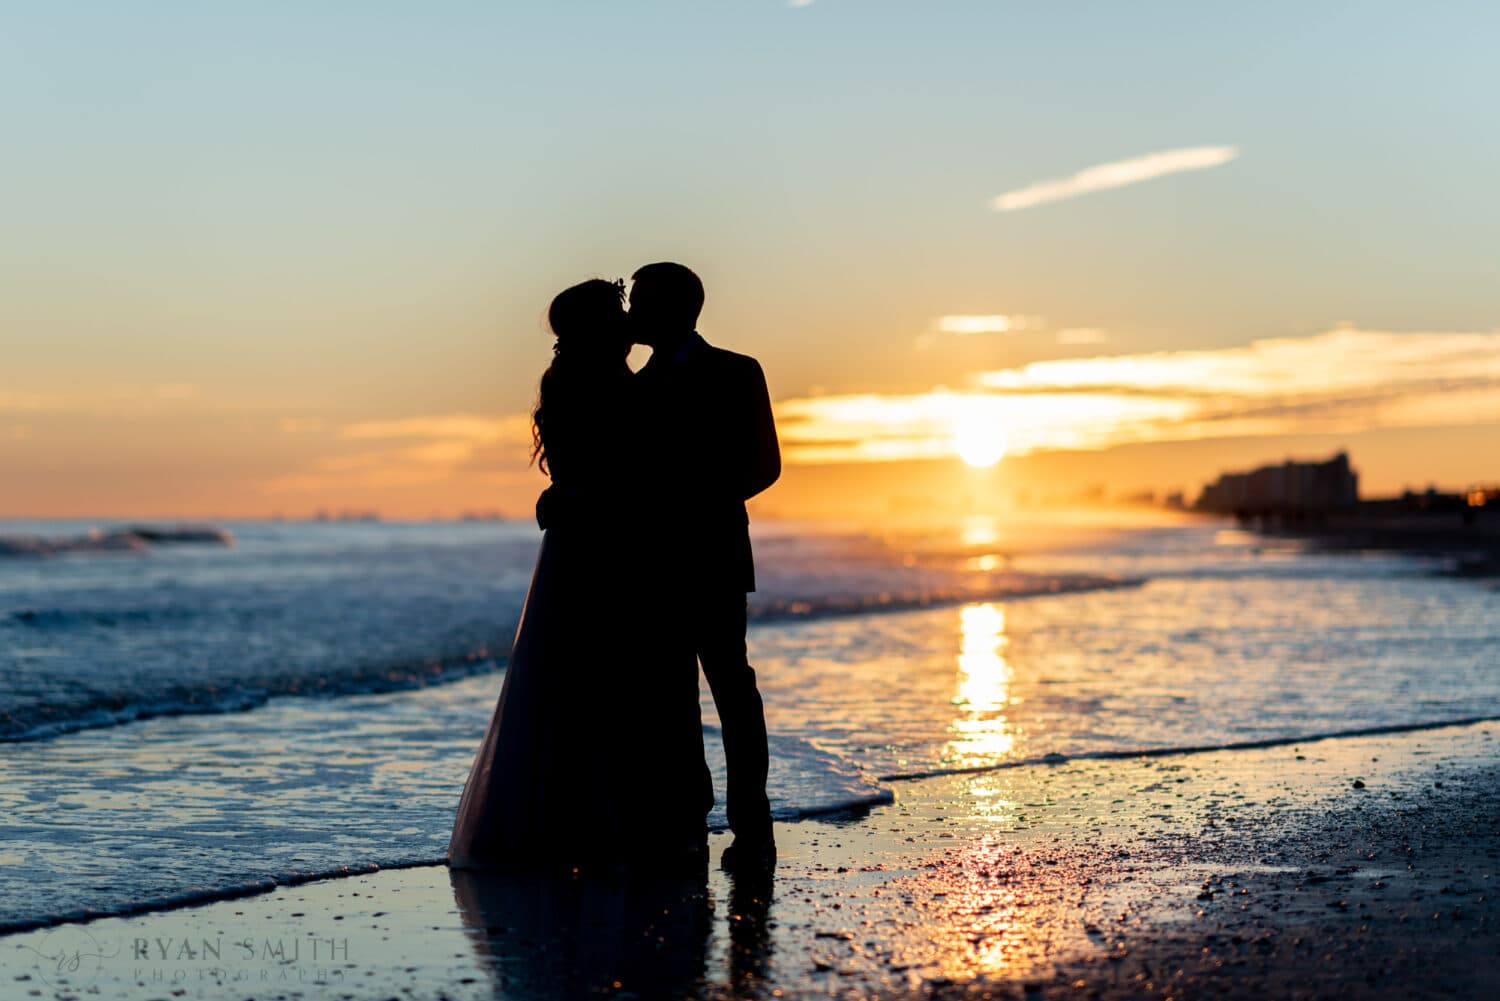 We got some great sunset silhouettes at my wedding today - Cherry Grove